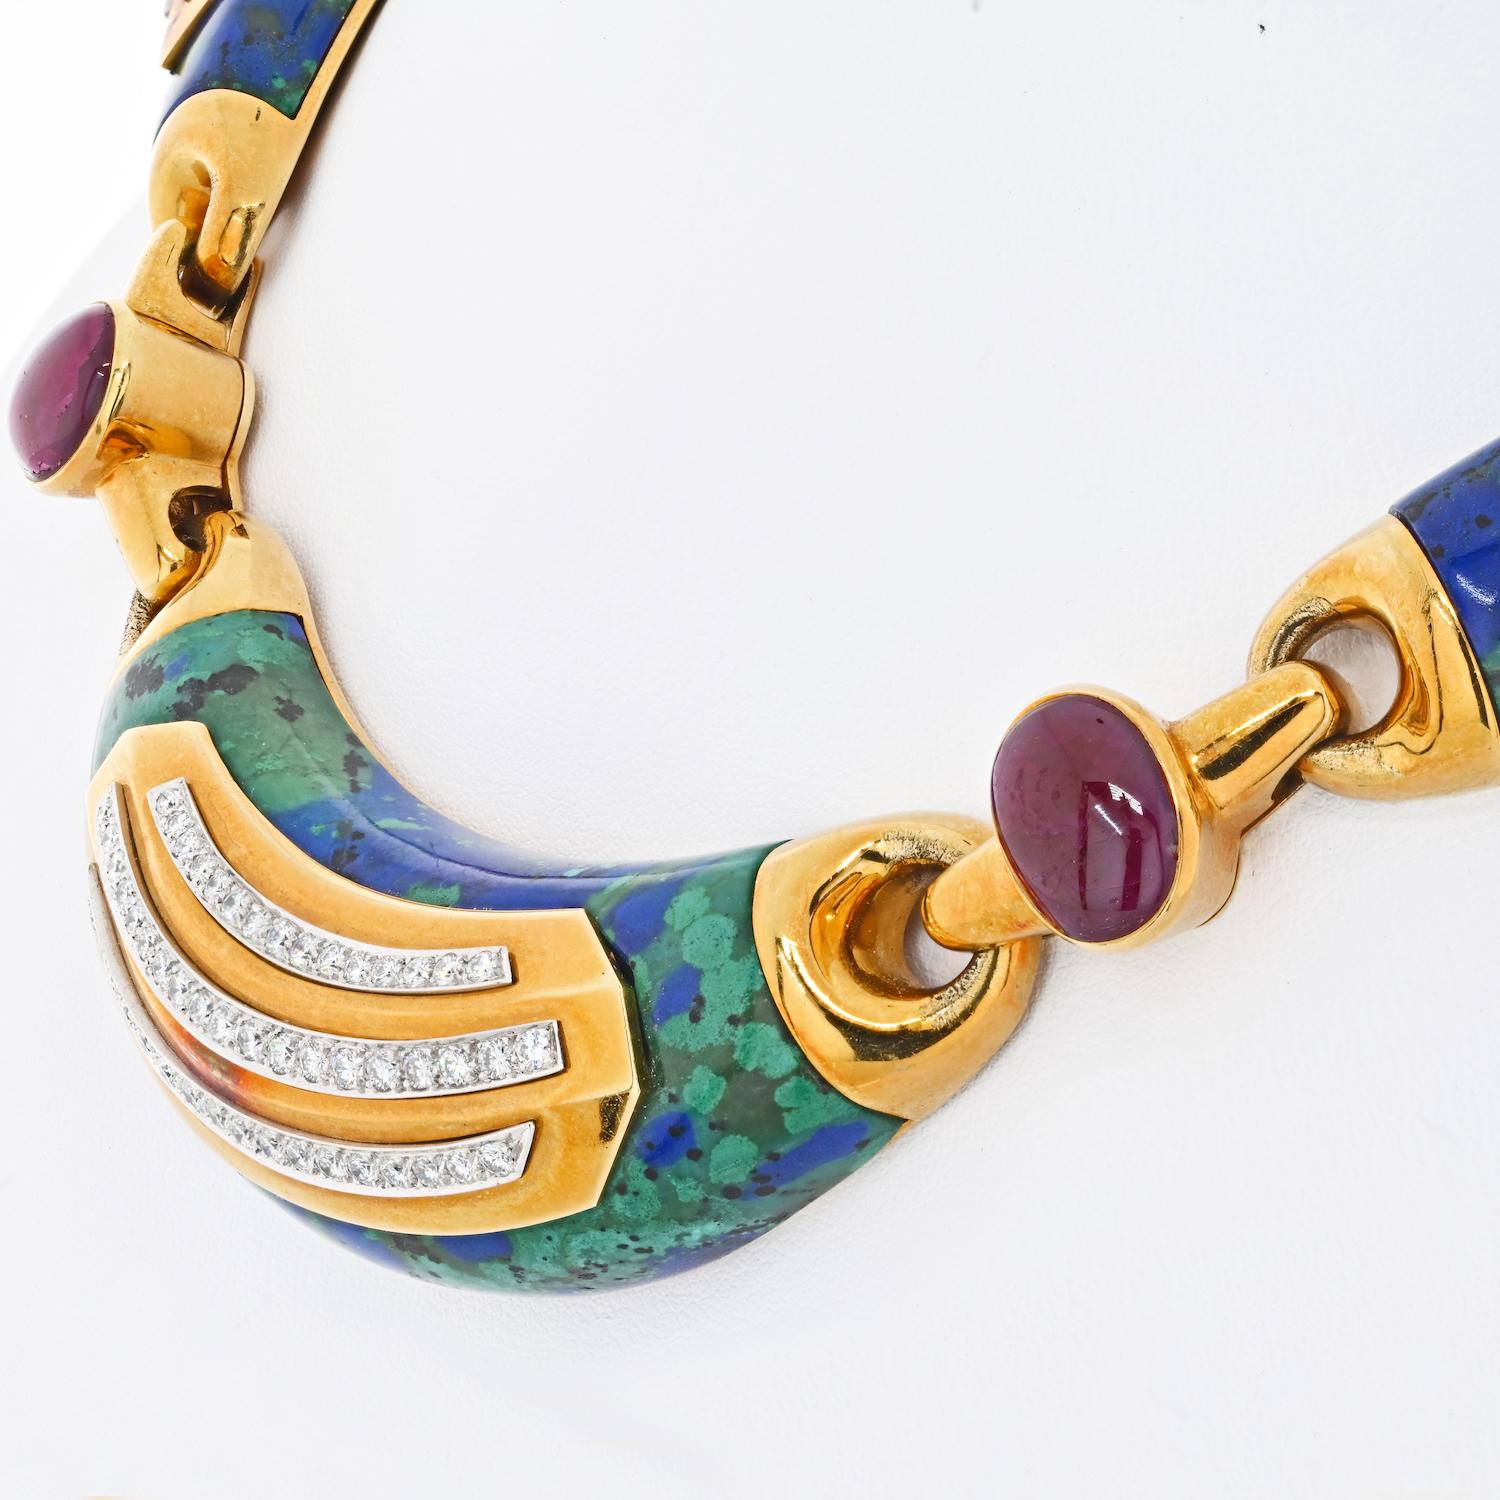 David Webb Vintage 18k Yellow Gold, Platinum, Azurmalachite, Ruby & Diamond Necklace.
The necklace is crafted from carved azurmalachite with 18k yellow gold, platinum, diamond, and ruby inlay. Why pay retail for David Webb when you can buy pre-owned